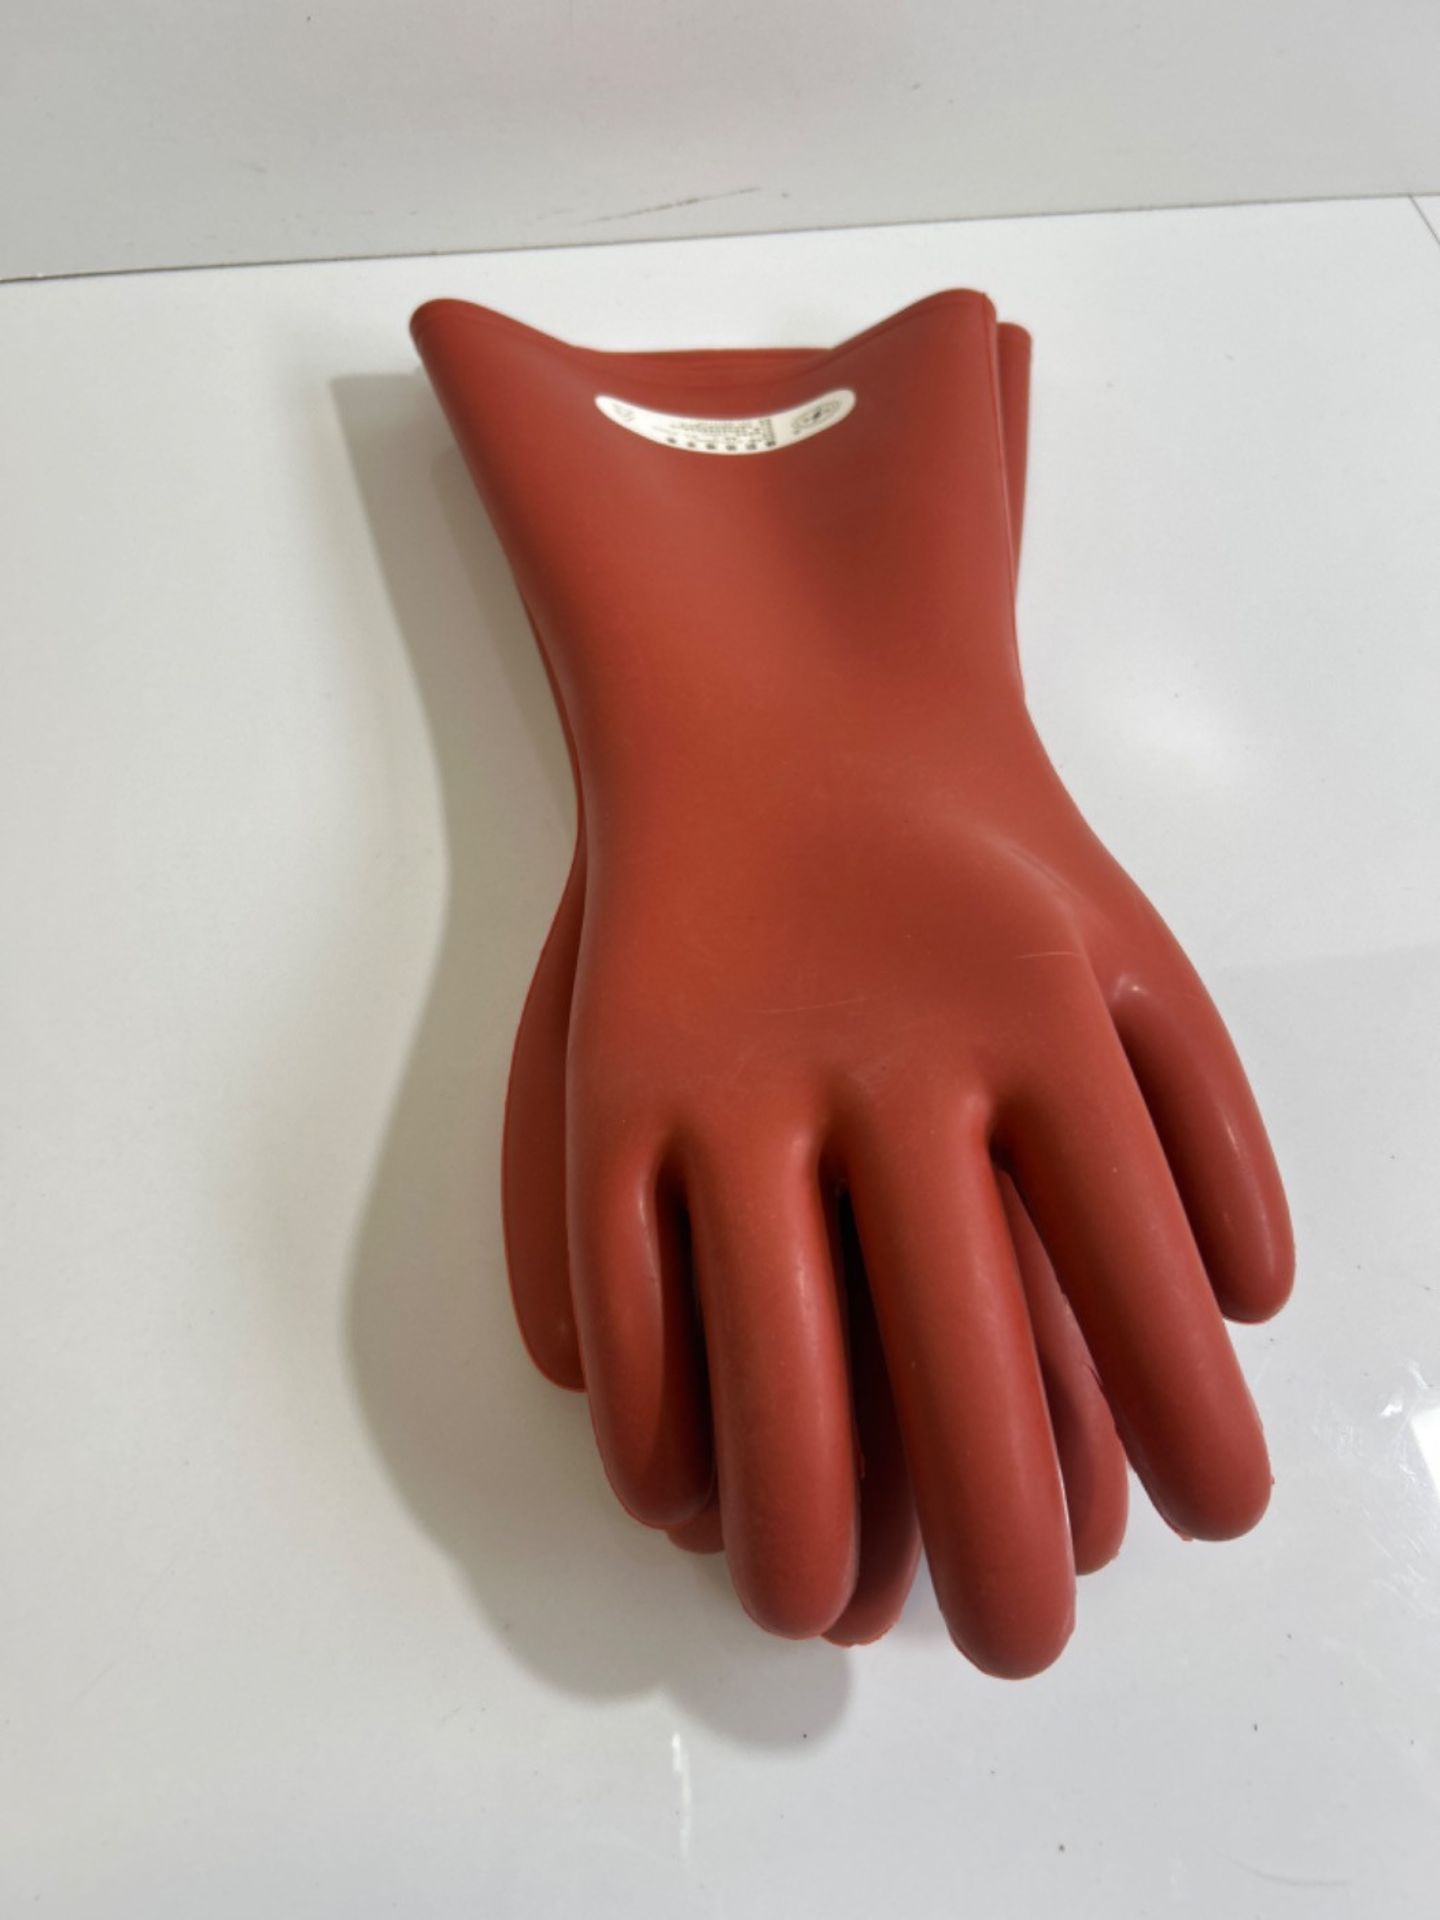 Electrical Insulated Rubber Gloves Electrician 12Kv High Voltage Safety Protective Work Gloves In... - Image 3 of 3